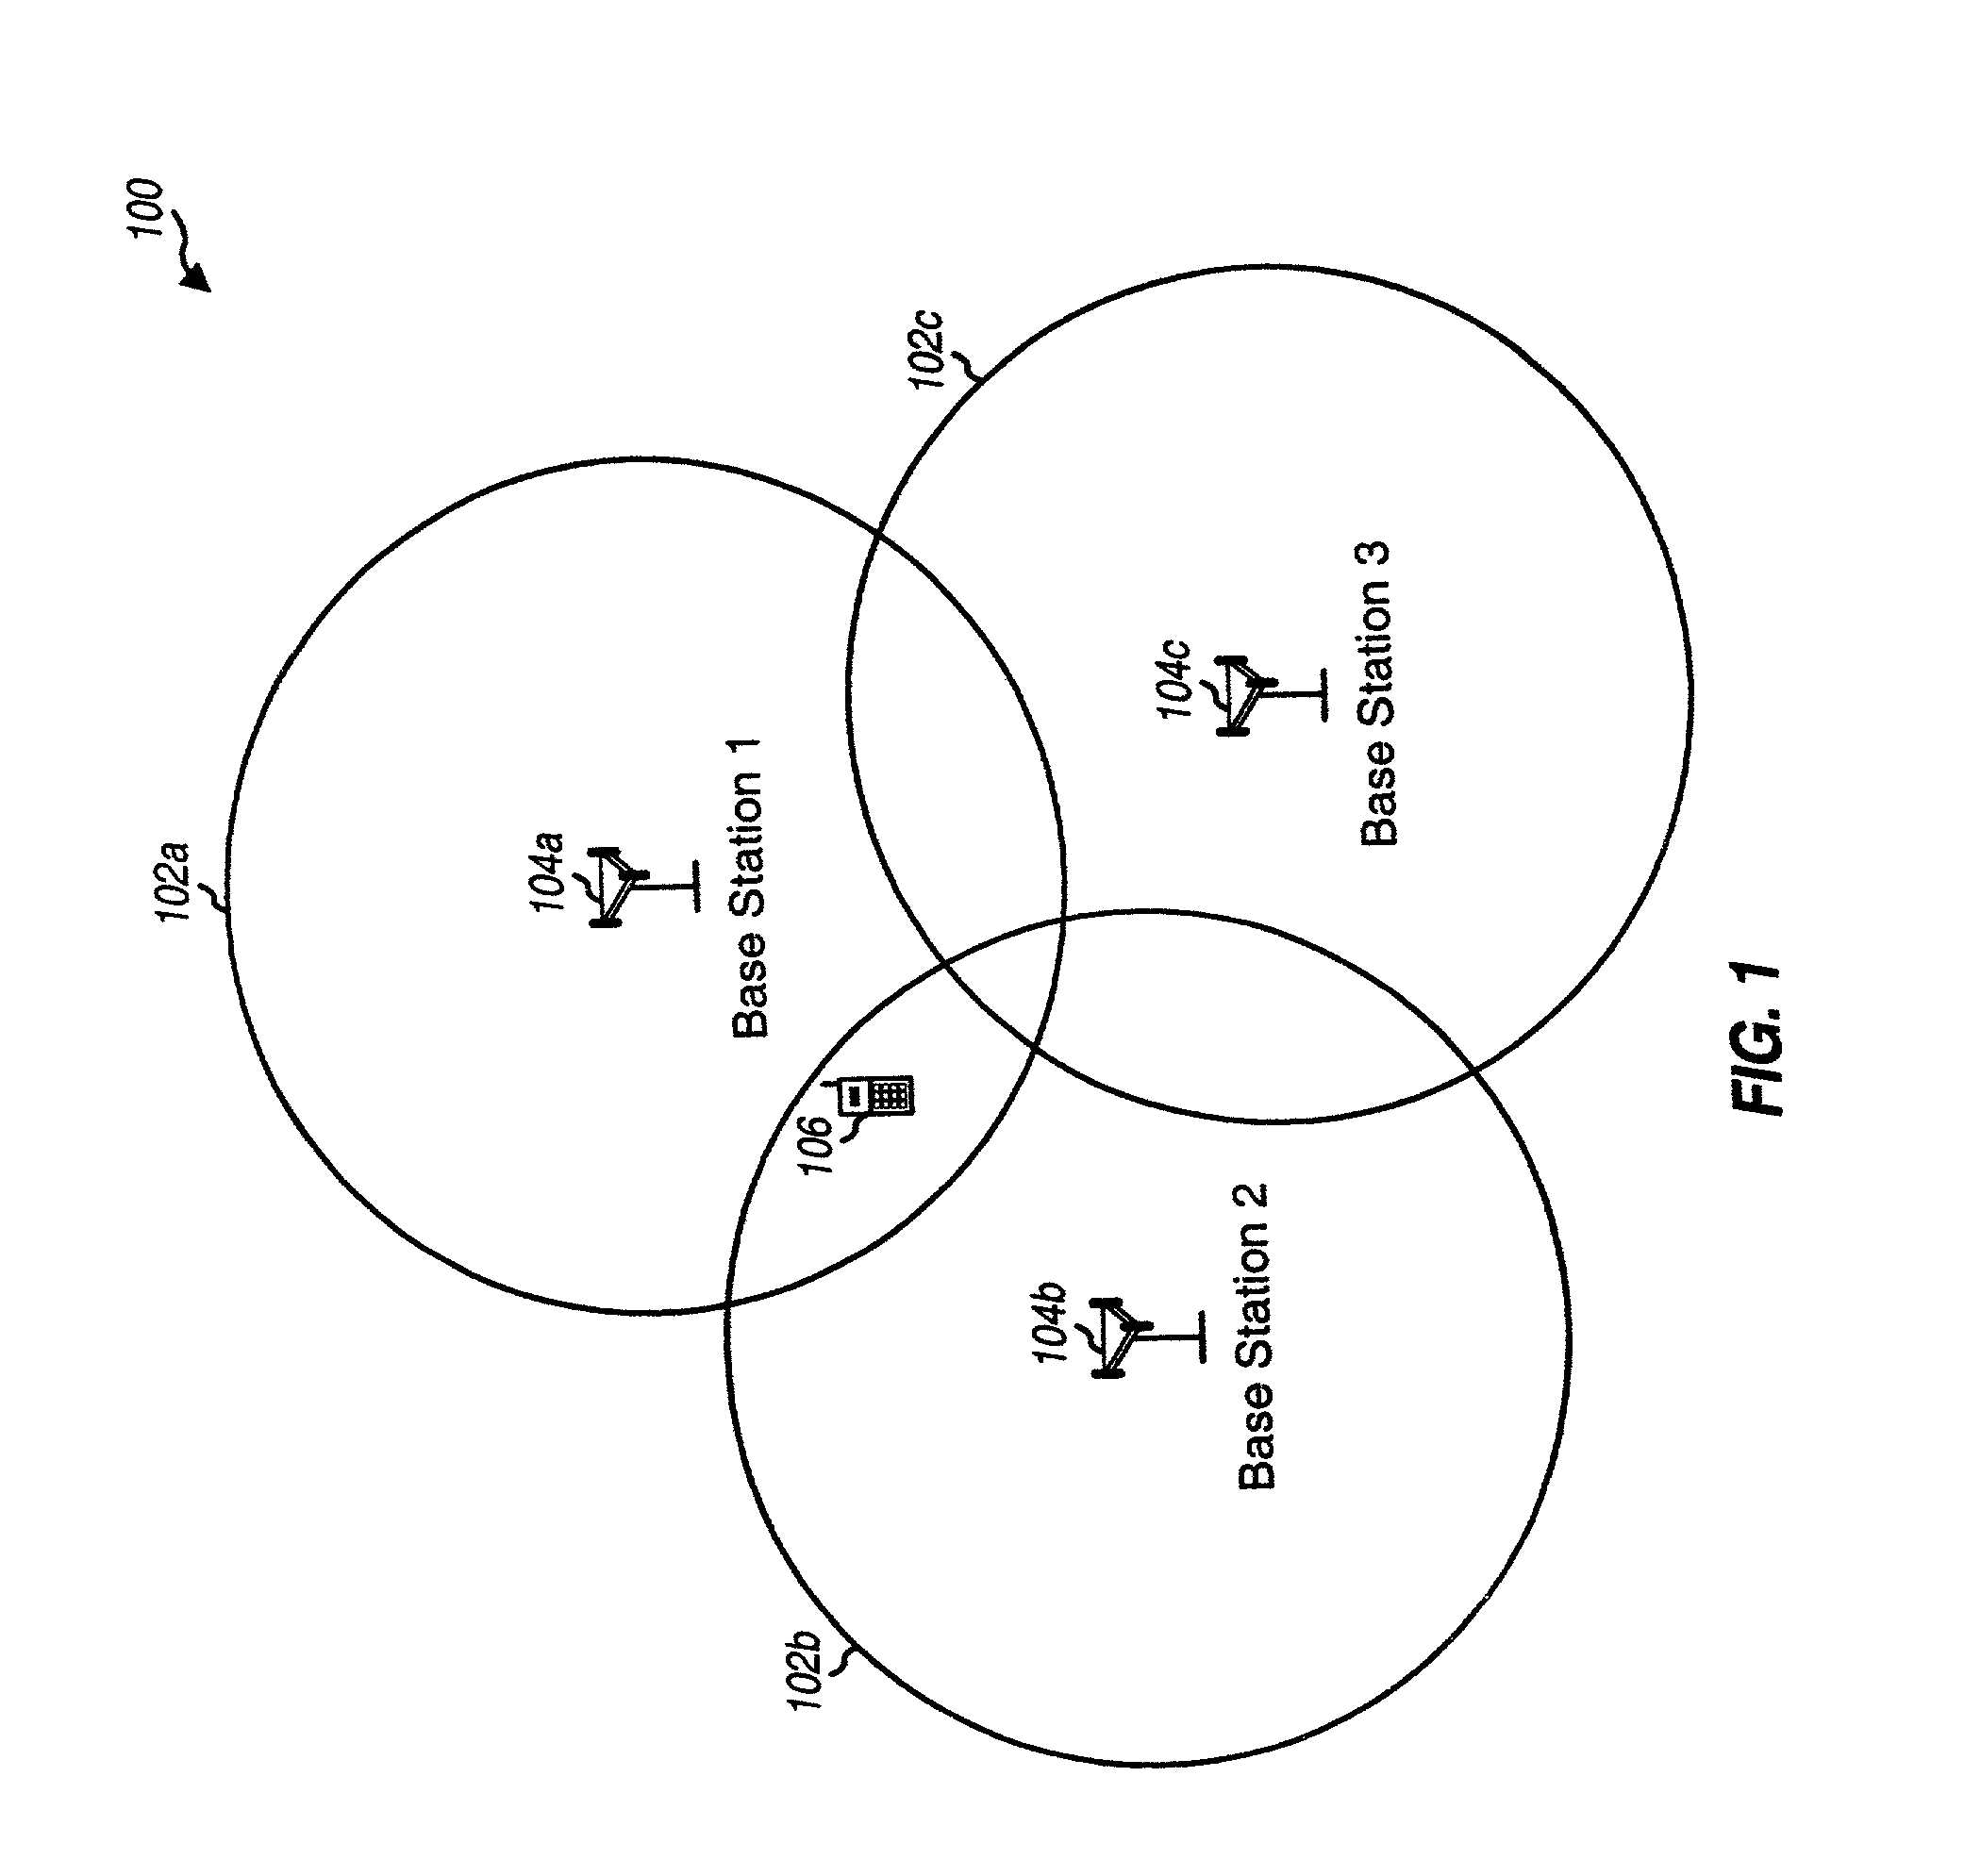 Method and apparatus for performing idle mode reacquisition and handoff in an asynchronous communication system